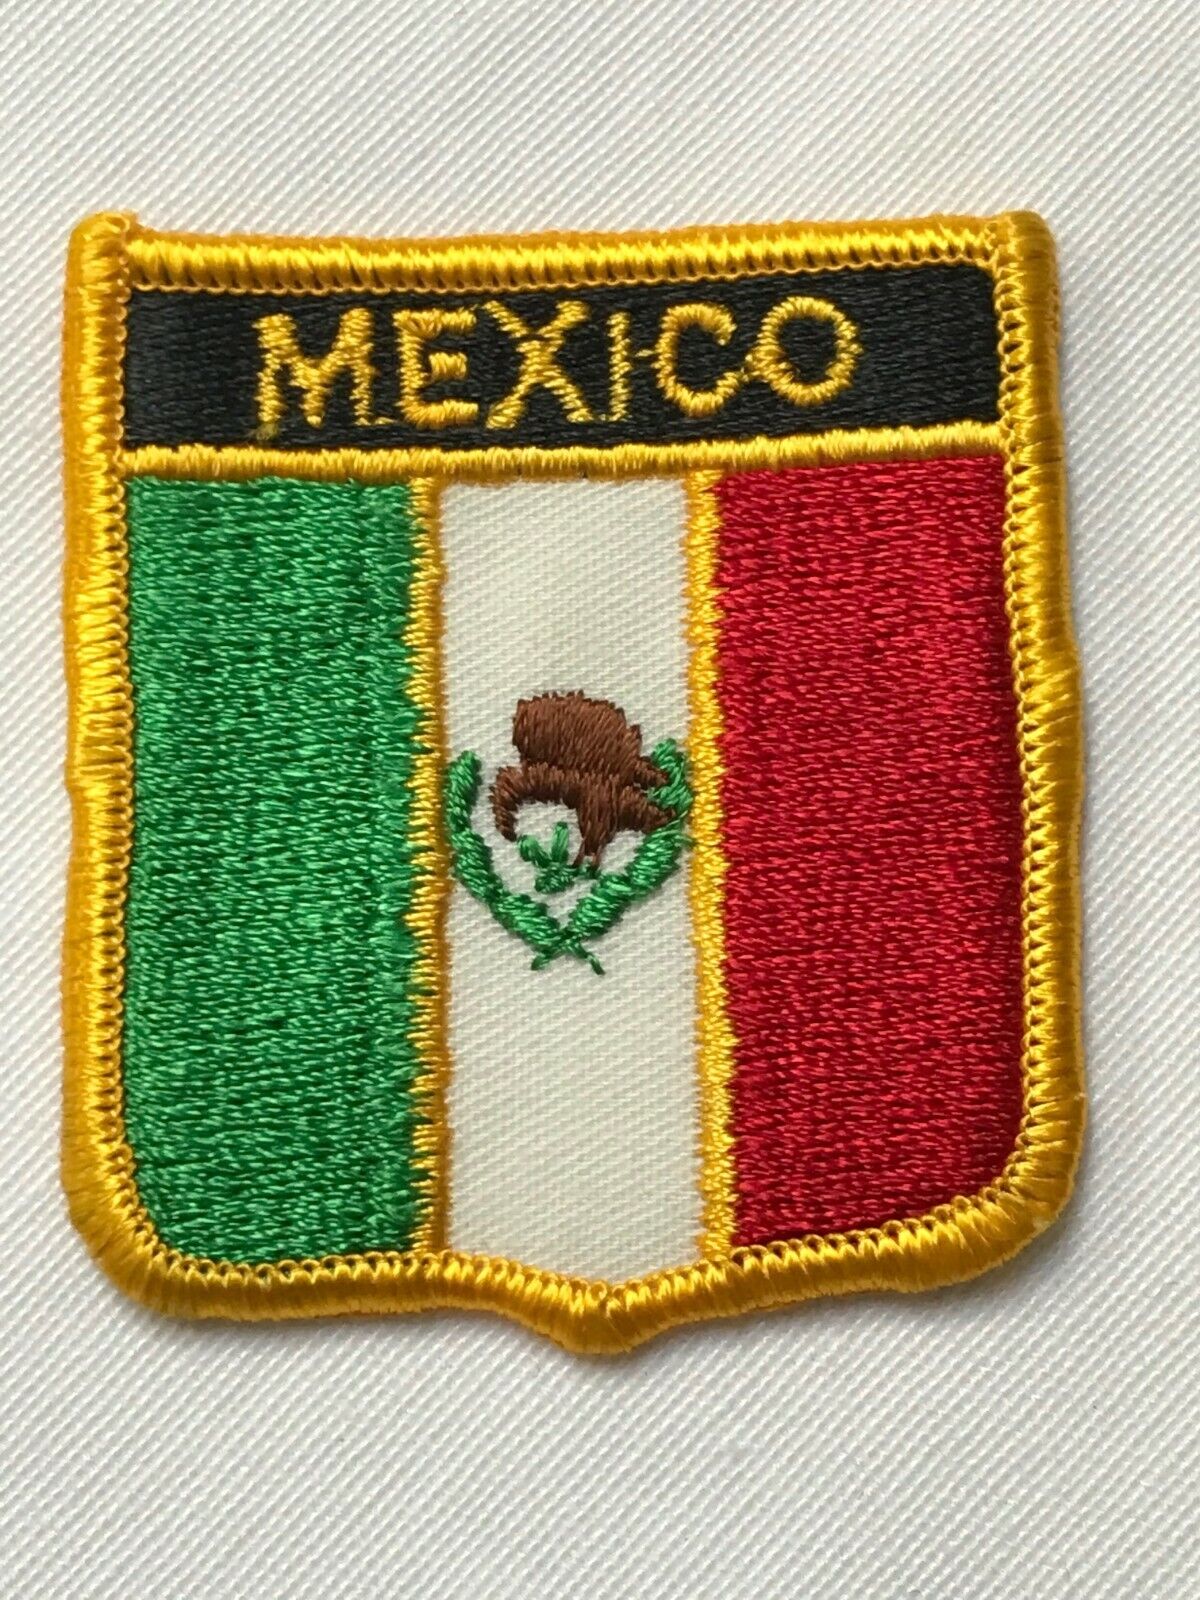 Vintage Patch Mexico Shield W/ Mexican Flag Embroidered Coat Of Arms 2.5" X 2.5"